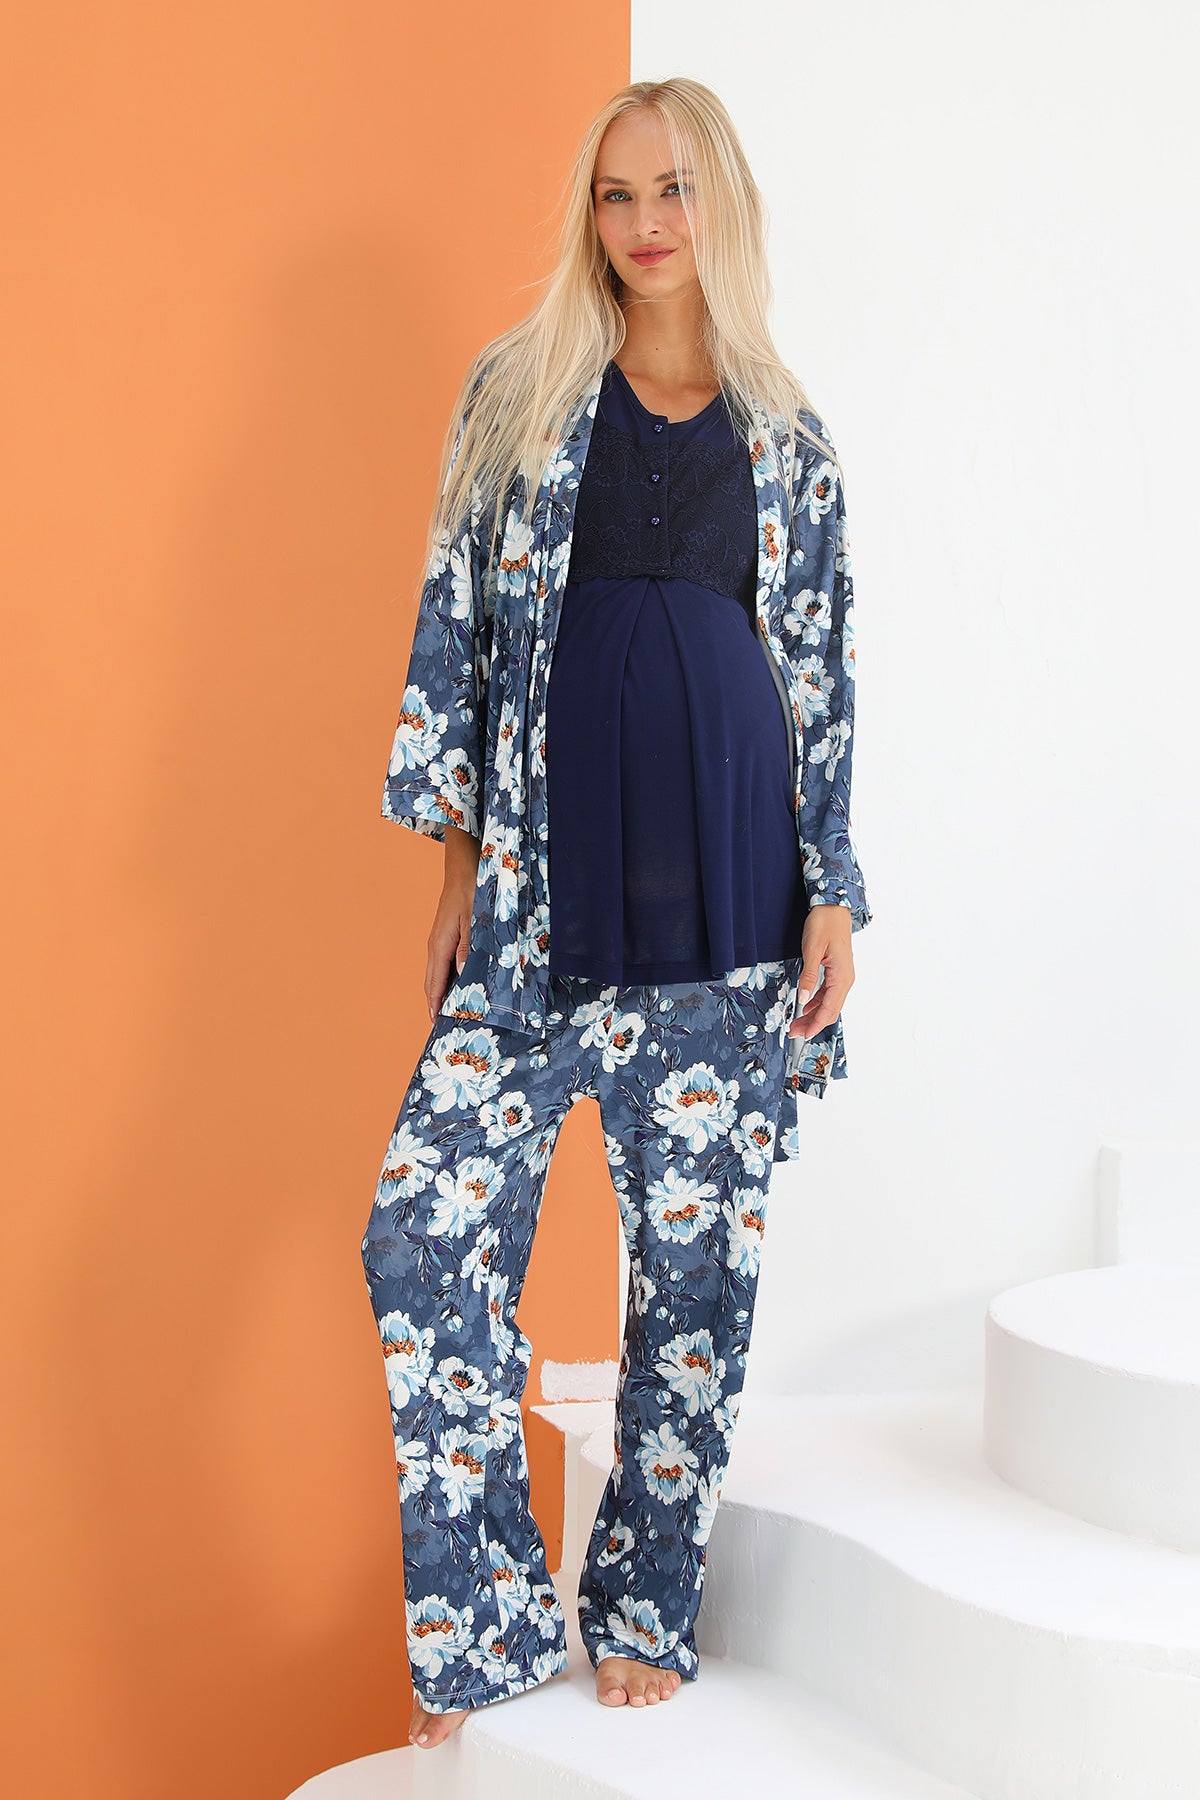 Shopymommy 55714 Blossom Lace Sleeve 3-Pieces Maternity & Nursing Pajamas With Flowery Robe Navy Blue